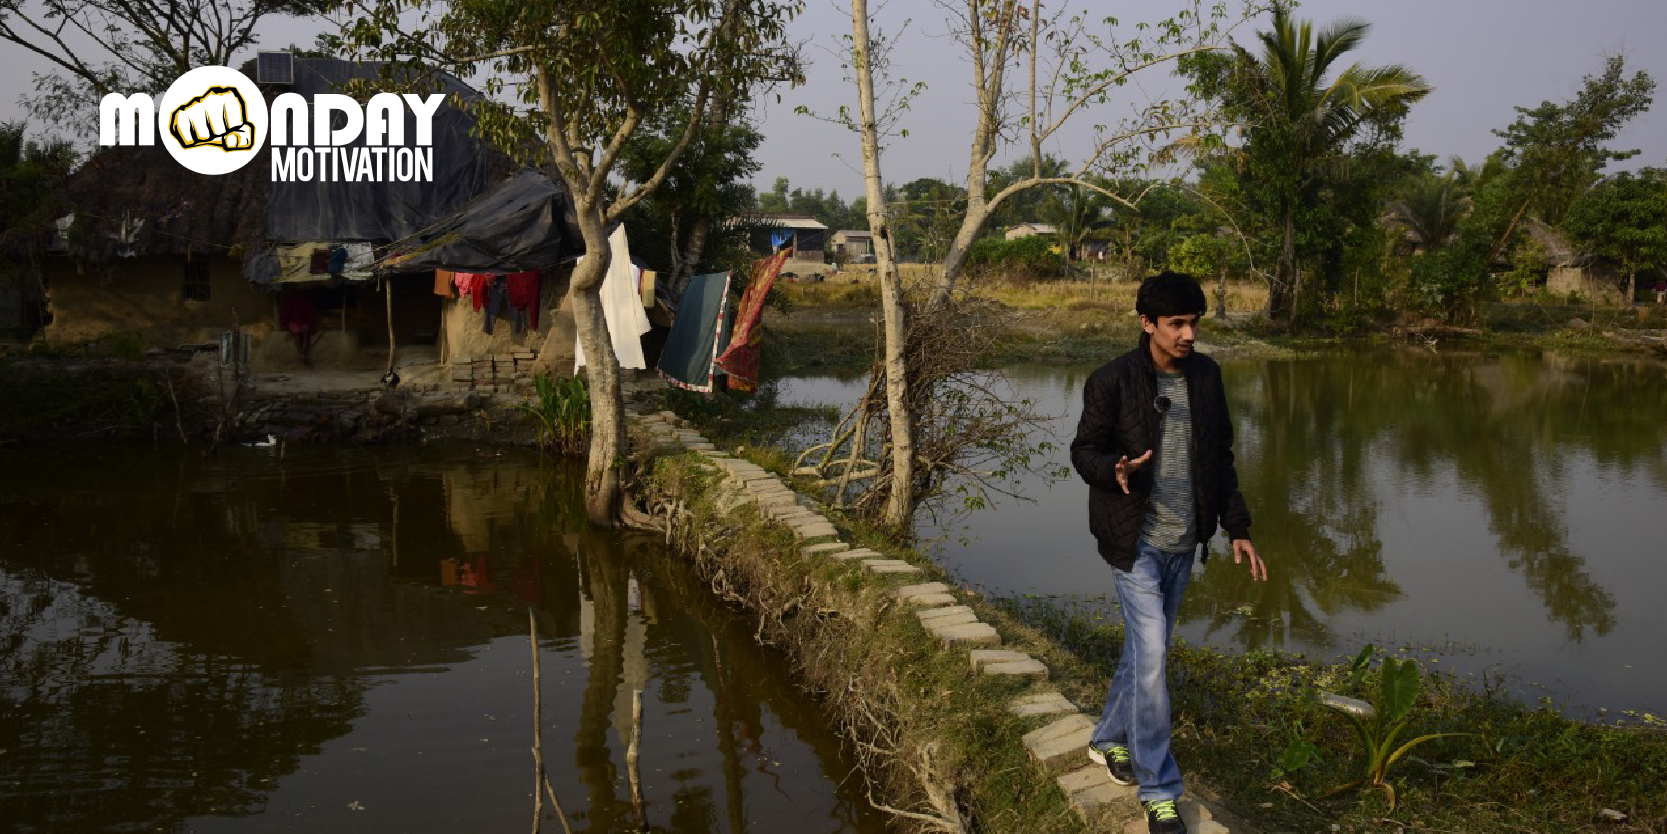 This 22-year-old is helping villagers in the Sundarbans improve their livelihoods